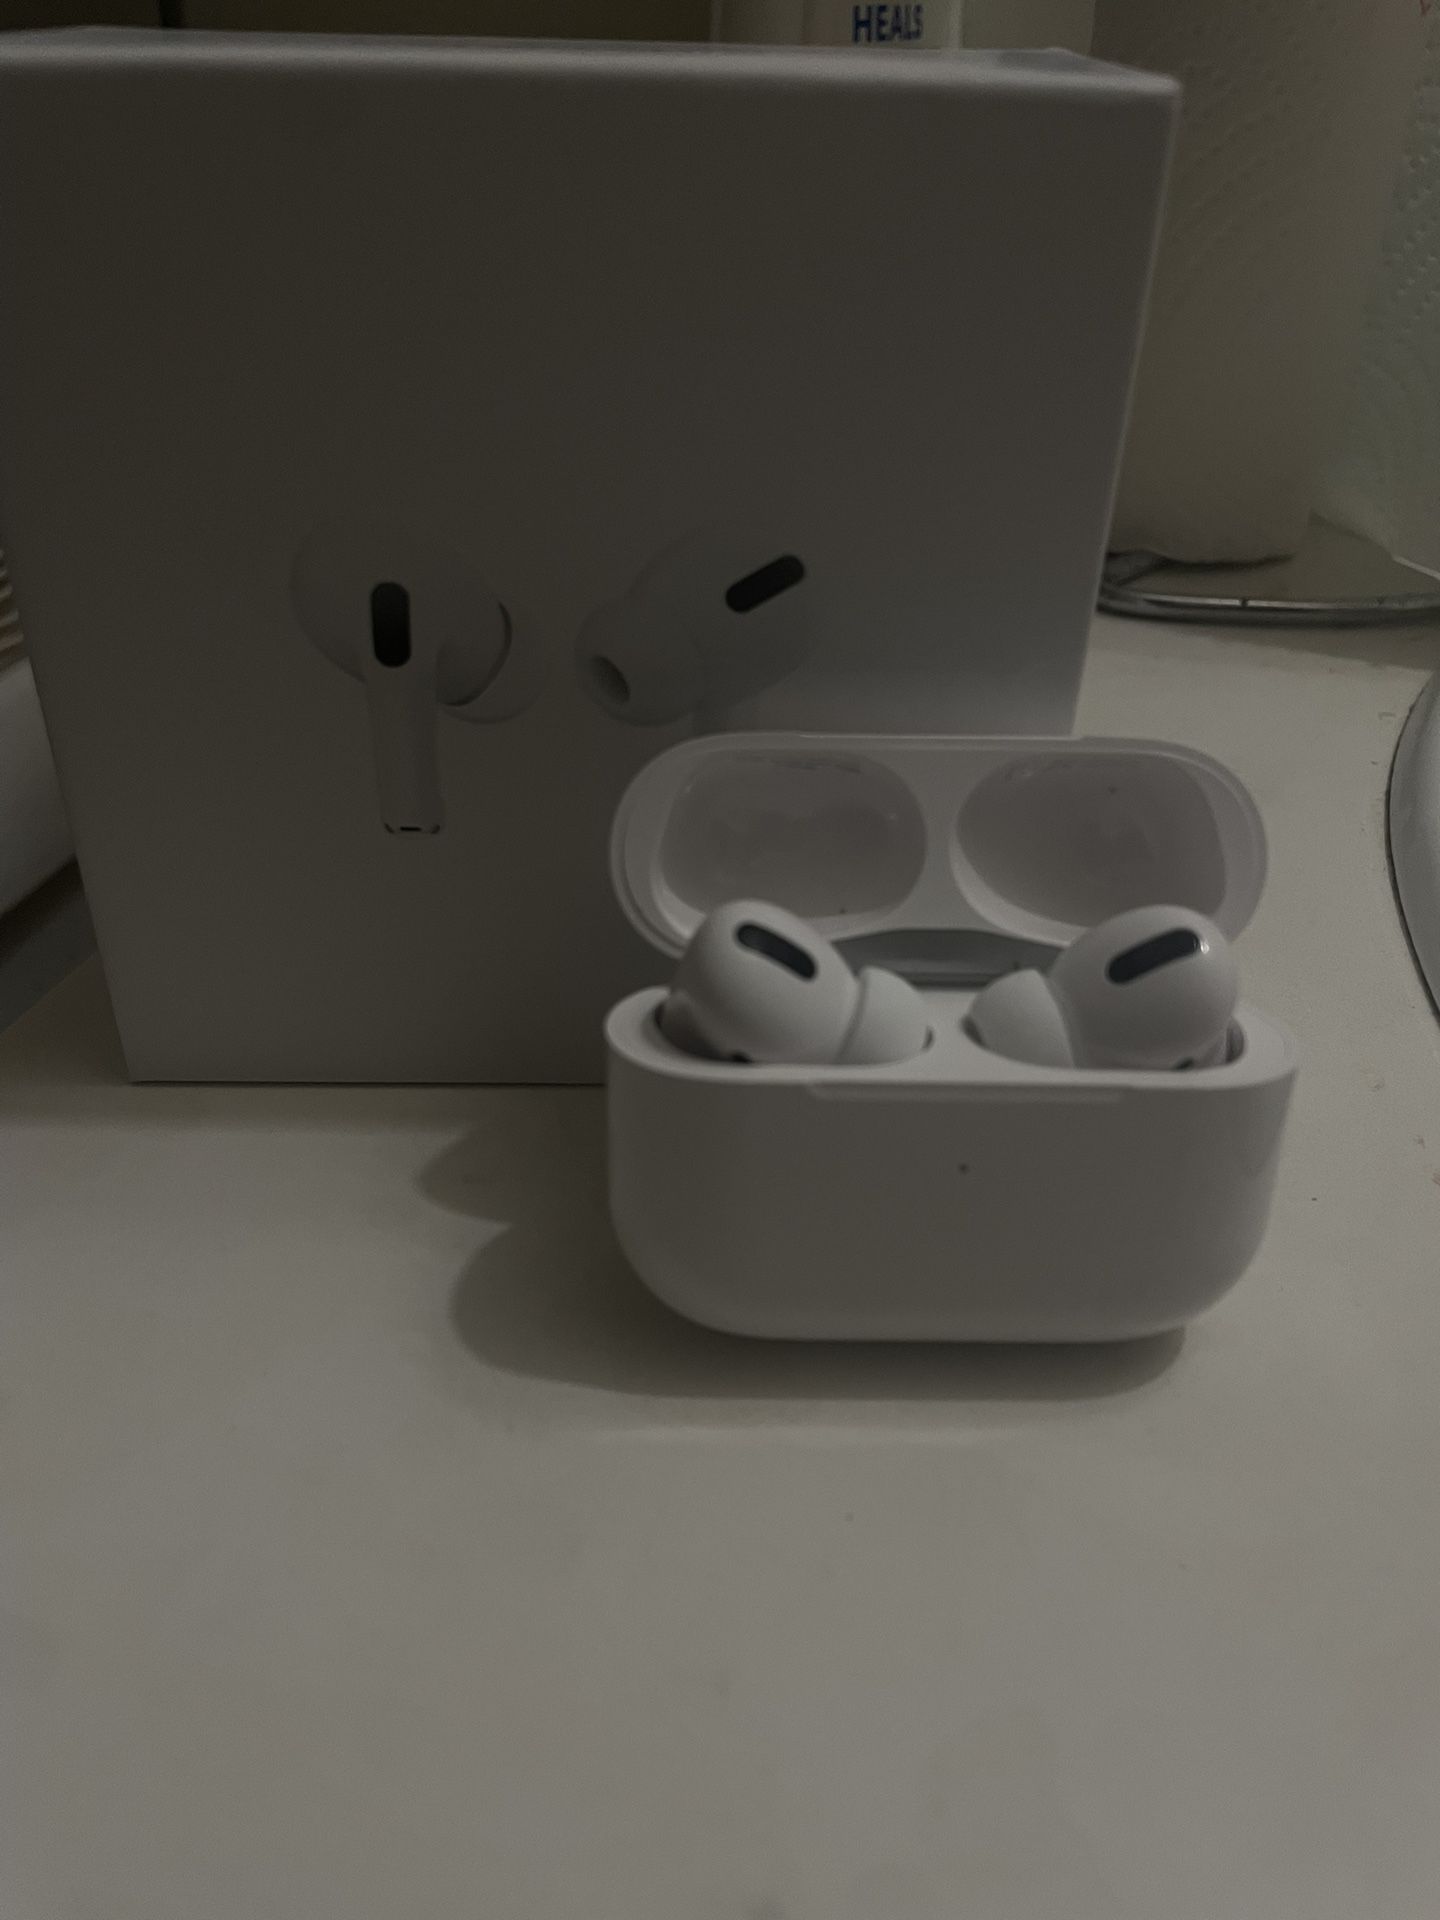 AirPods Pro 2nd Generation